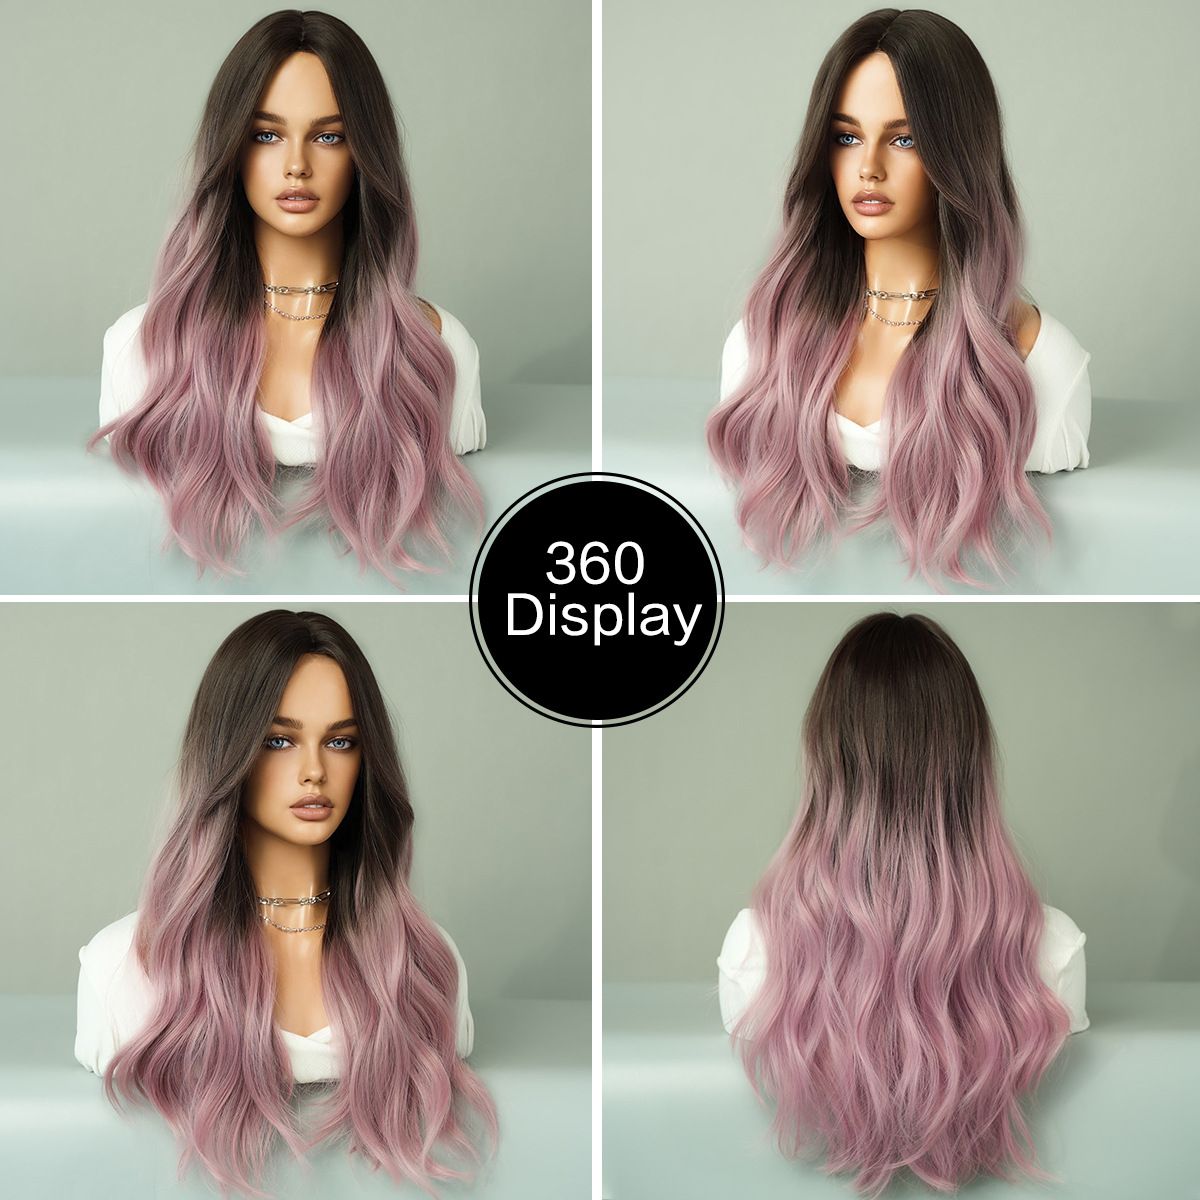 A fashionable synthetic wig in light purple with long wavy hair, ready to go